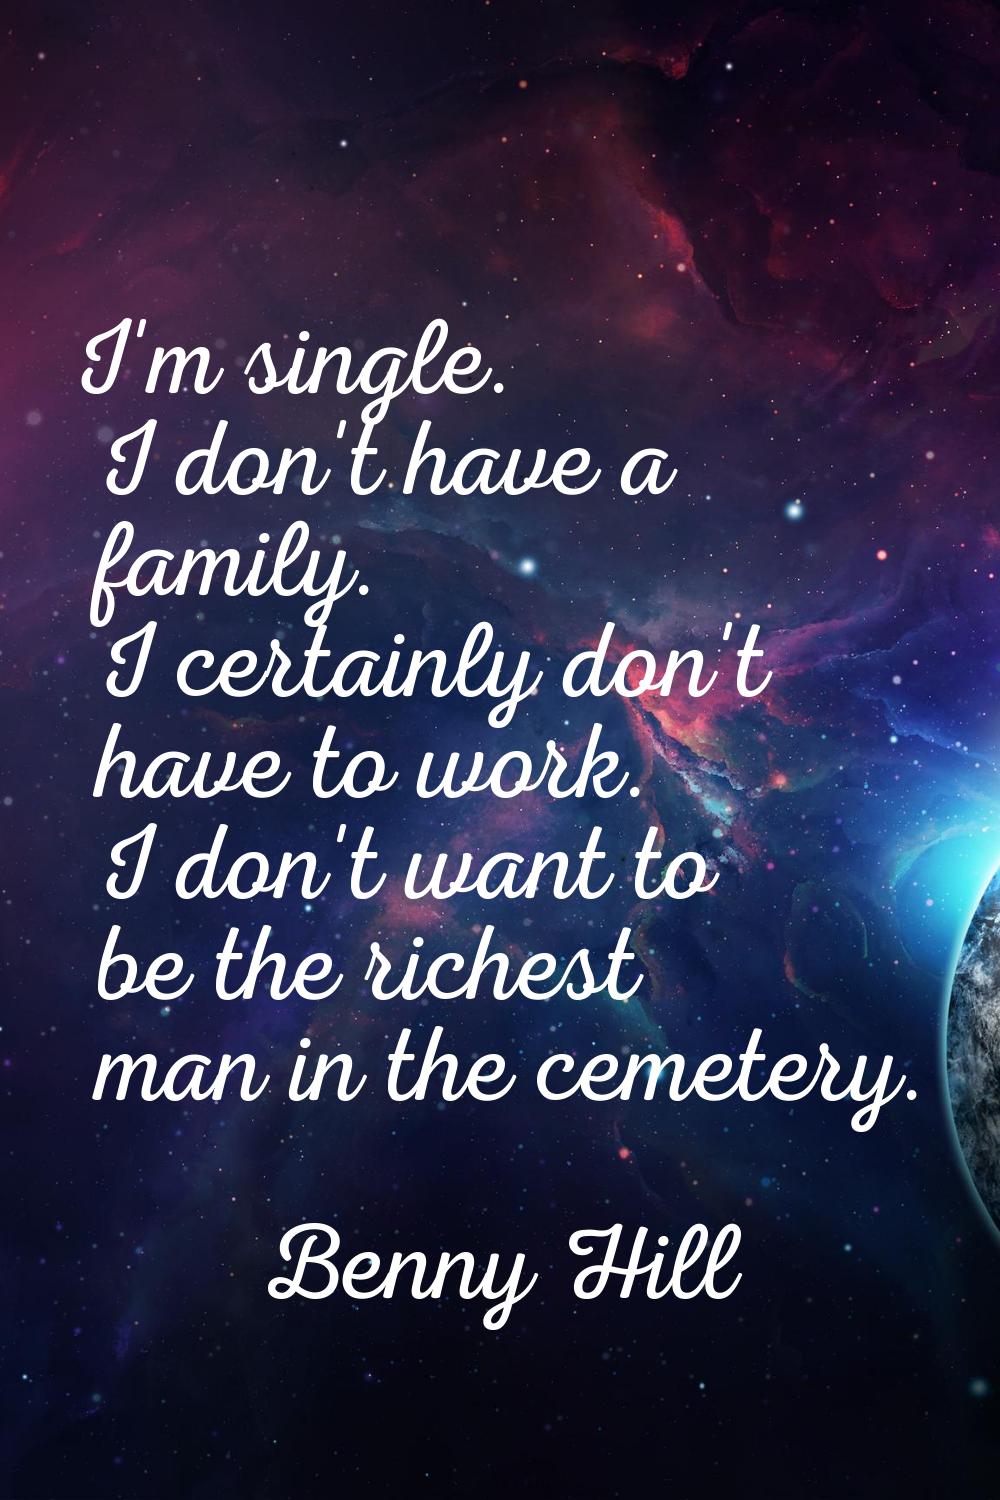 I'm single. I don't have a family. I certainly don't have to work. I don't want to be the richest m